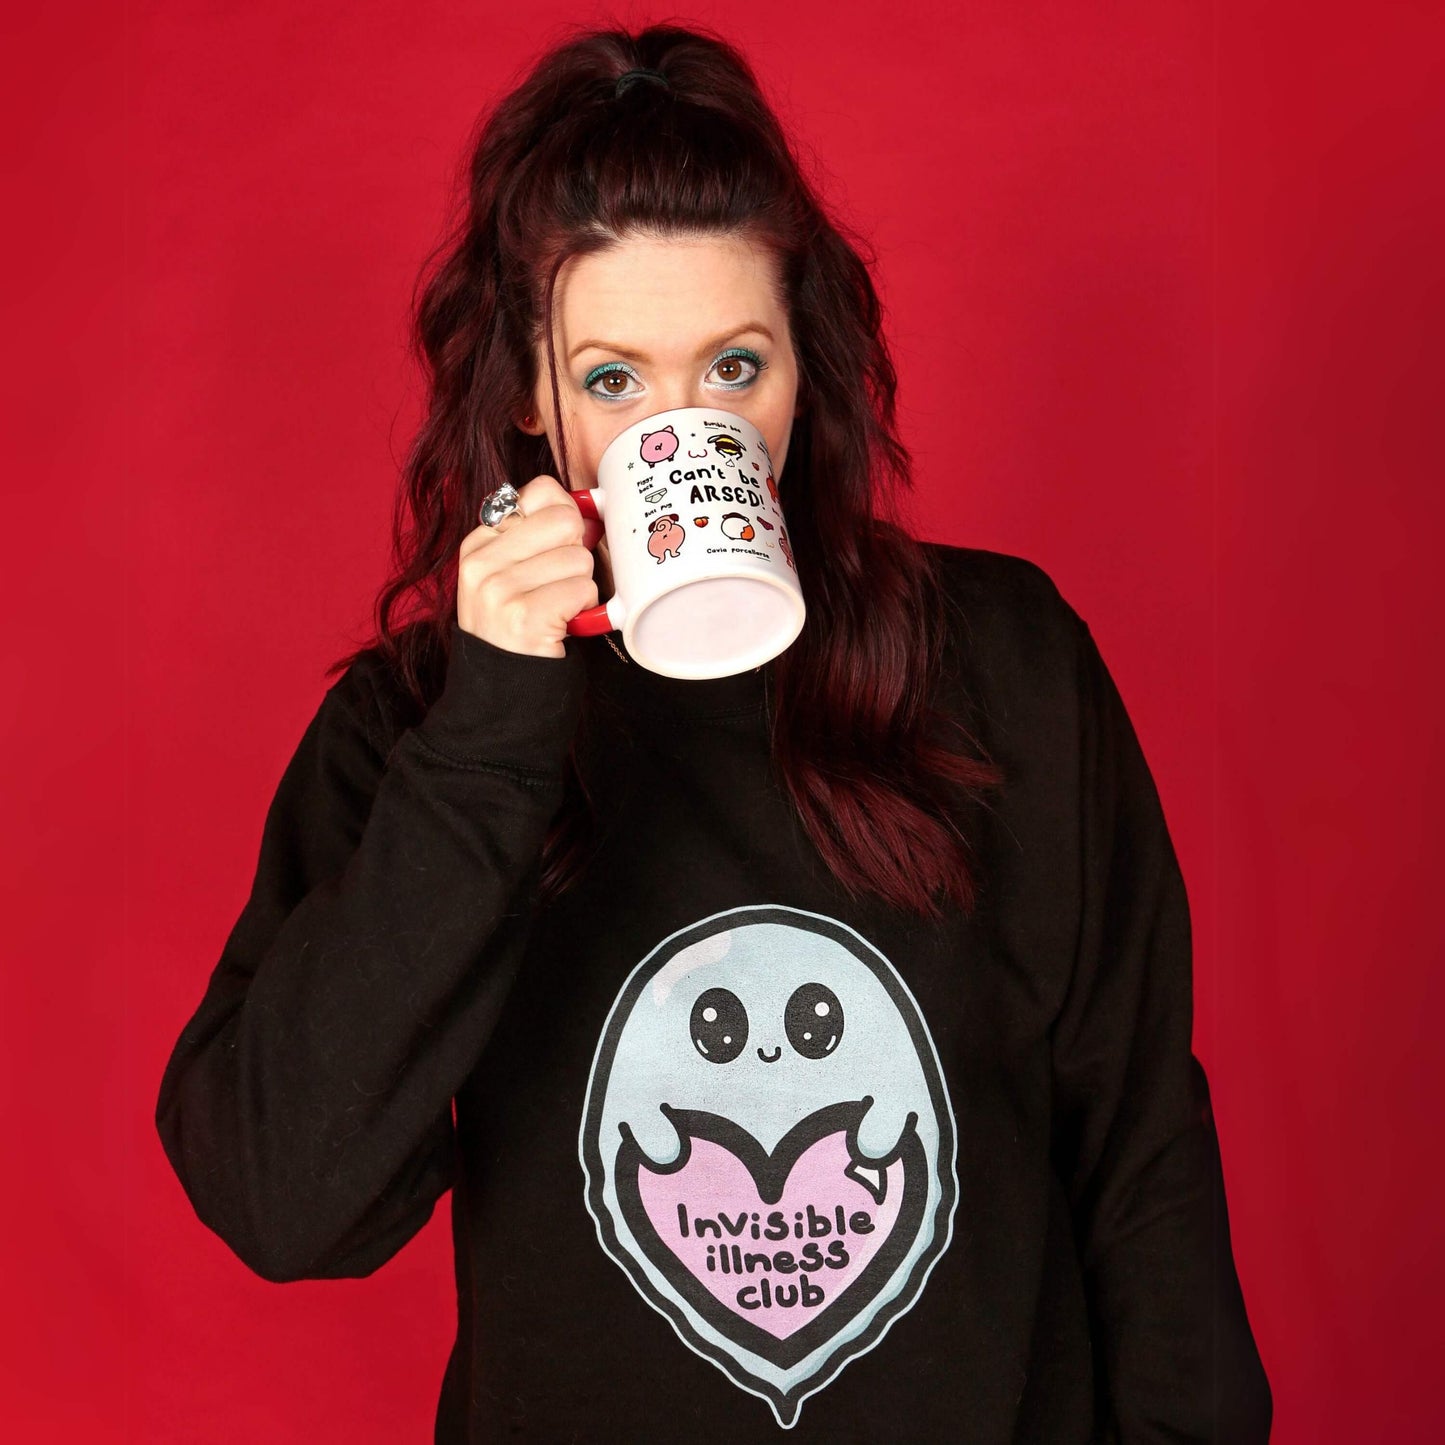 The Invisible Illness Club Sweatshirt Jumper being modelled by Nikky (owner of innabox) who has brown hair, blue eye makeup and blue and red nails. She is facing forward lifting the innabox can't be arsed mug to her face. The black sweater features a smiling pastel blue ghost with big sparkly eyes holding up a pastel pink heart with black text reading 'invisible illness club'. The hand drawn design is raising awareness for hidden disabilities.